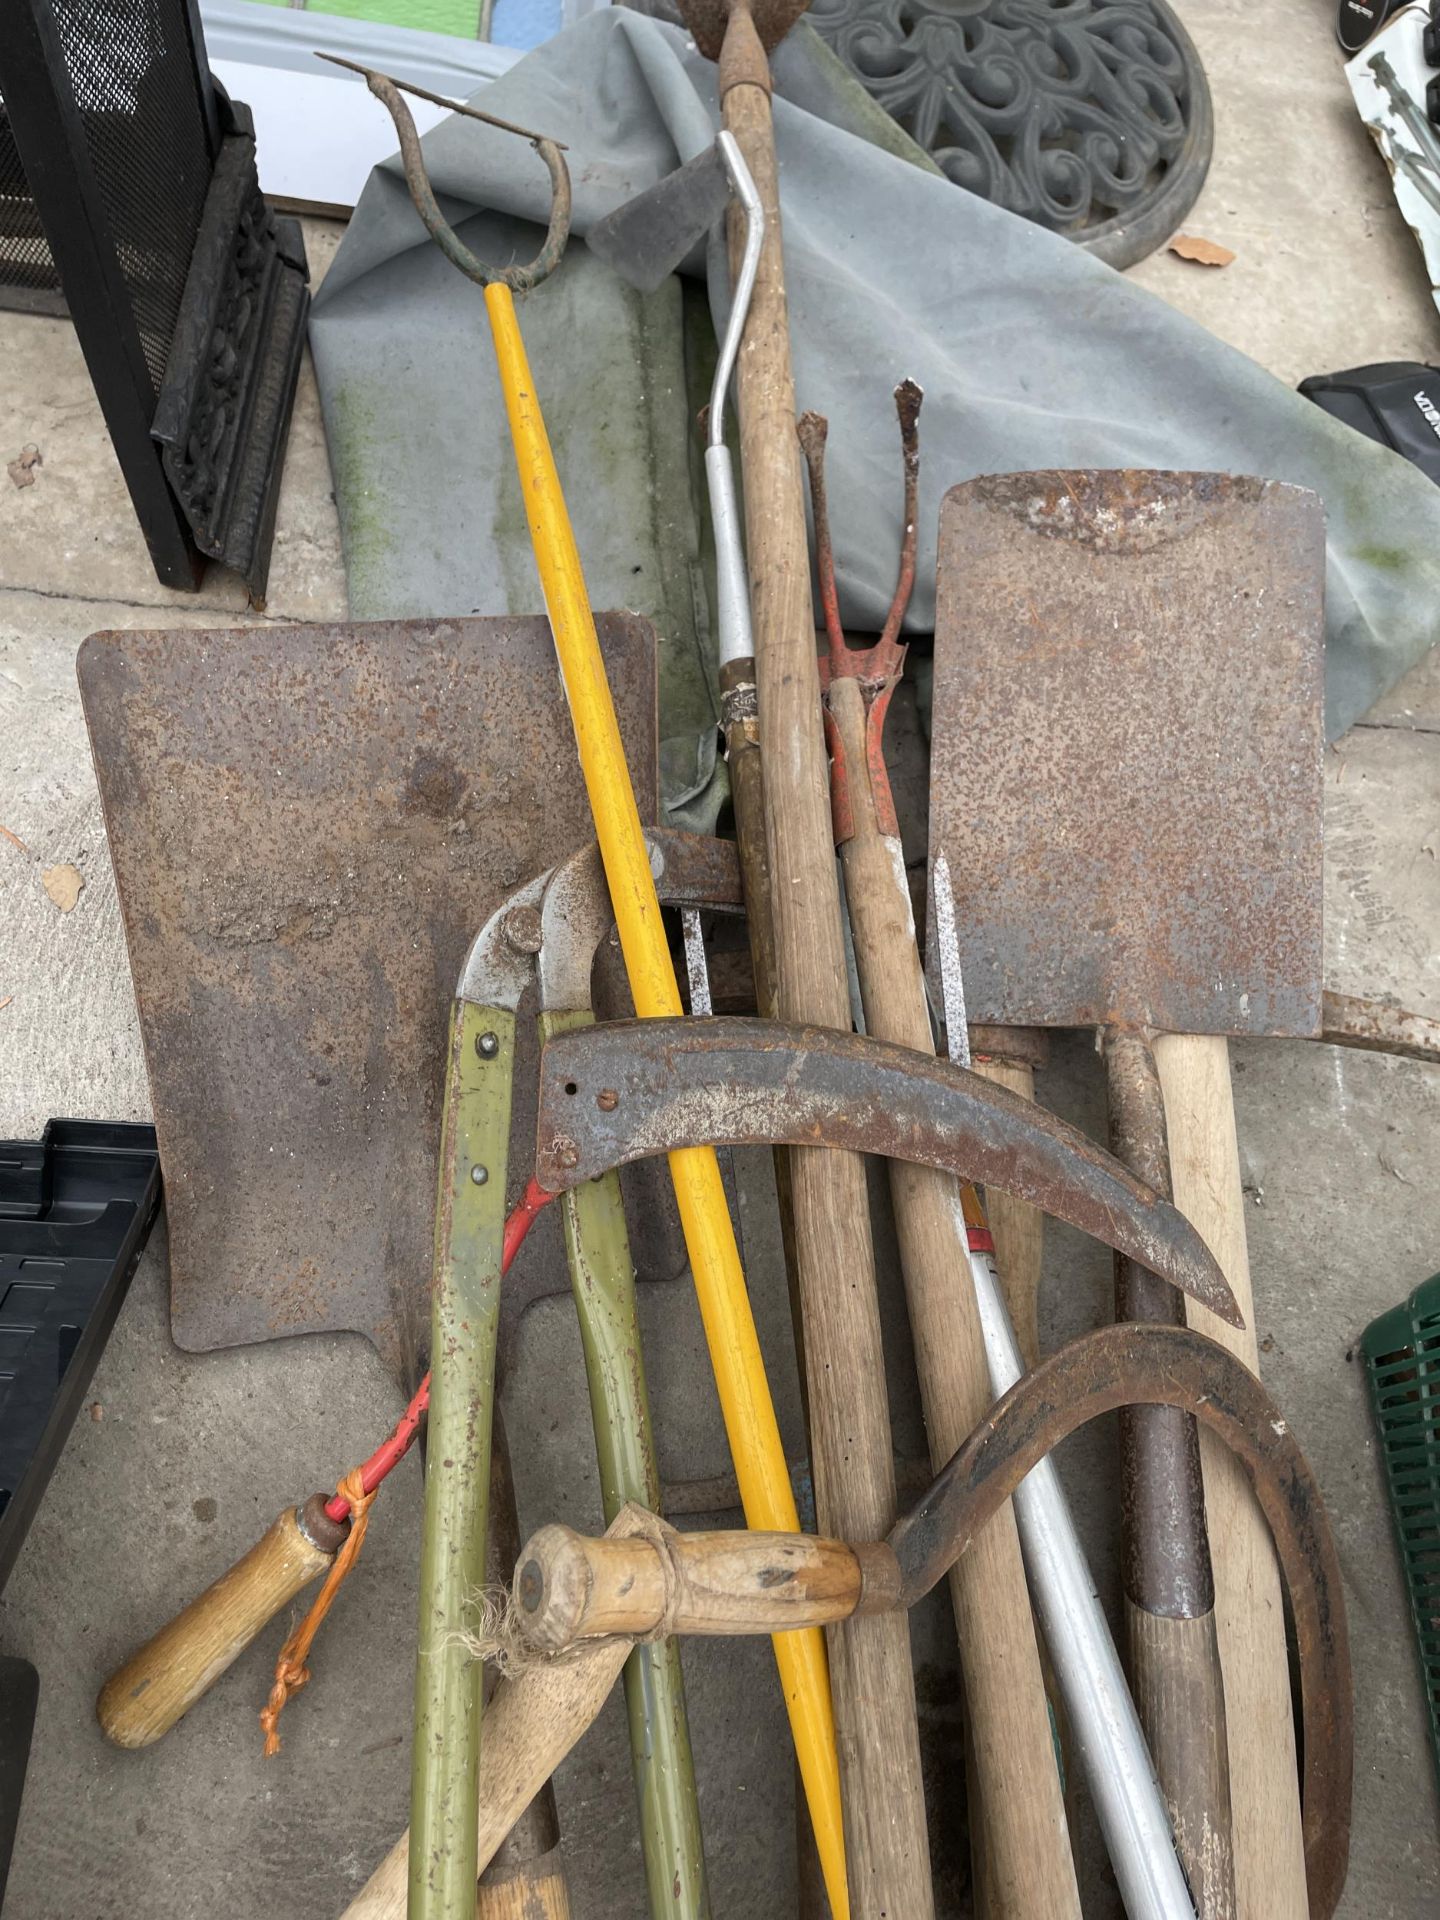 A COLLECTION OF GARDEN TOOLS TO INCLUDE SPADES, RAKES AND SHEARS ETC - Image 2 of 2